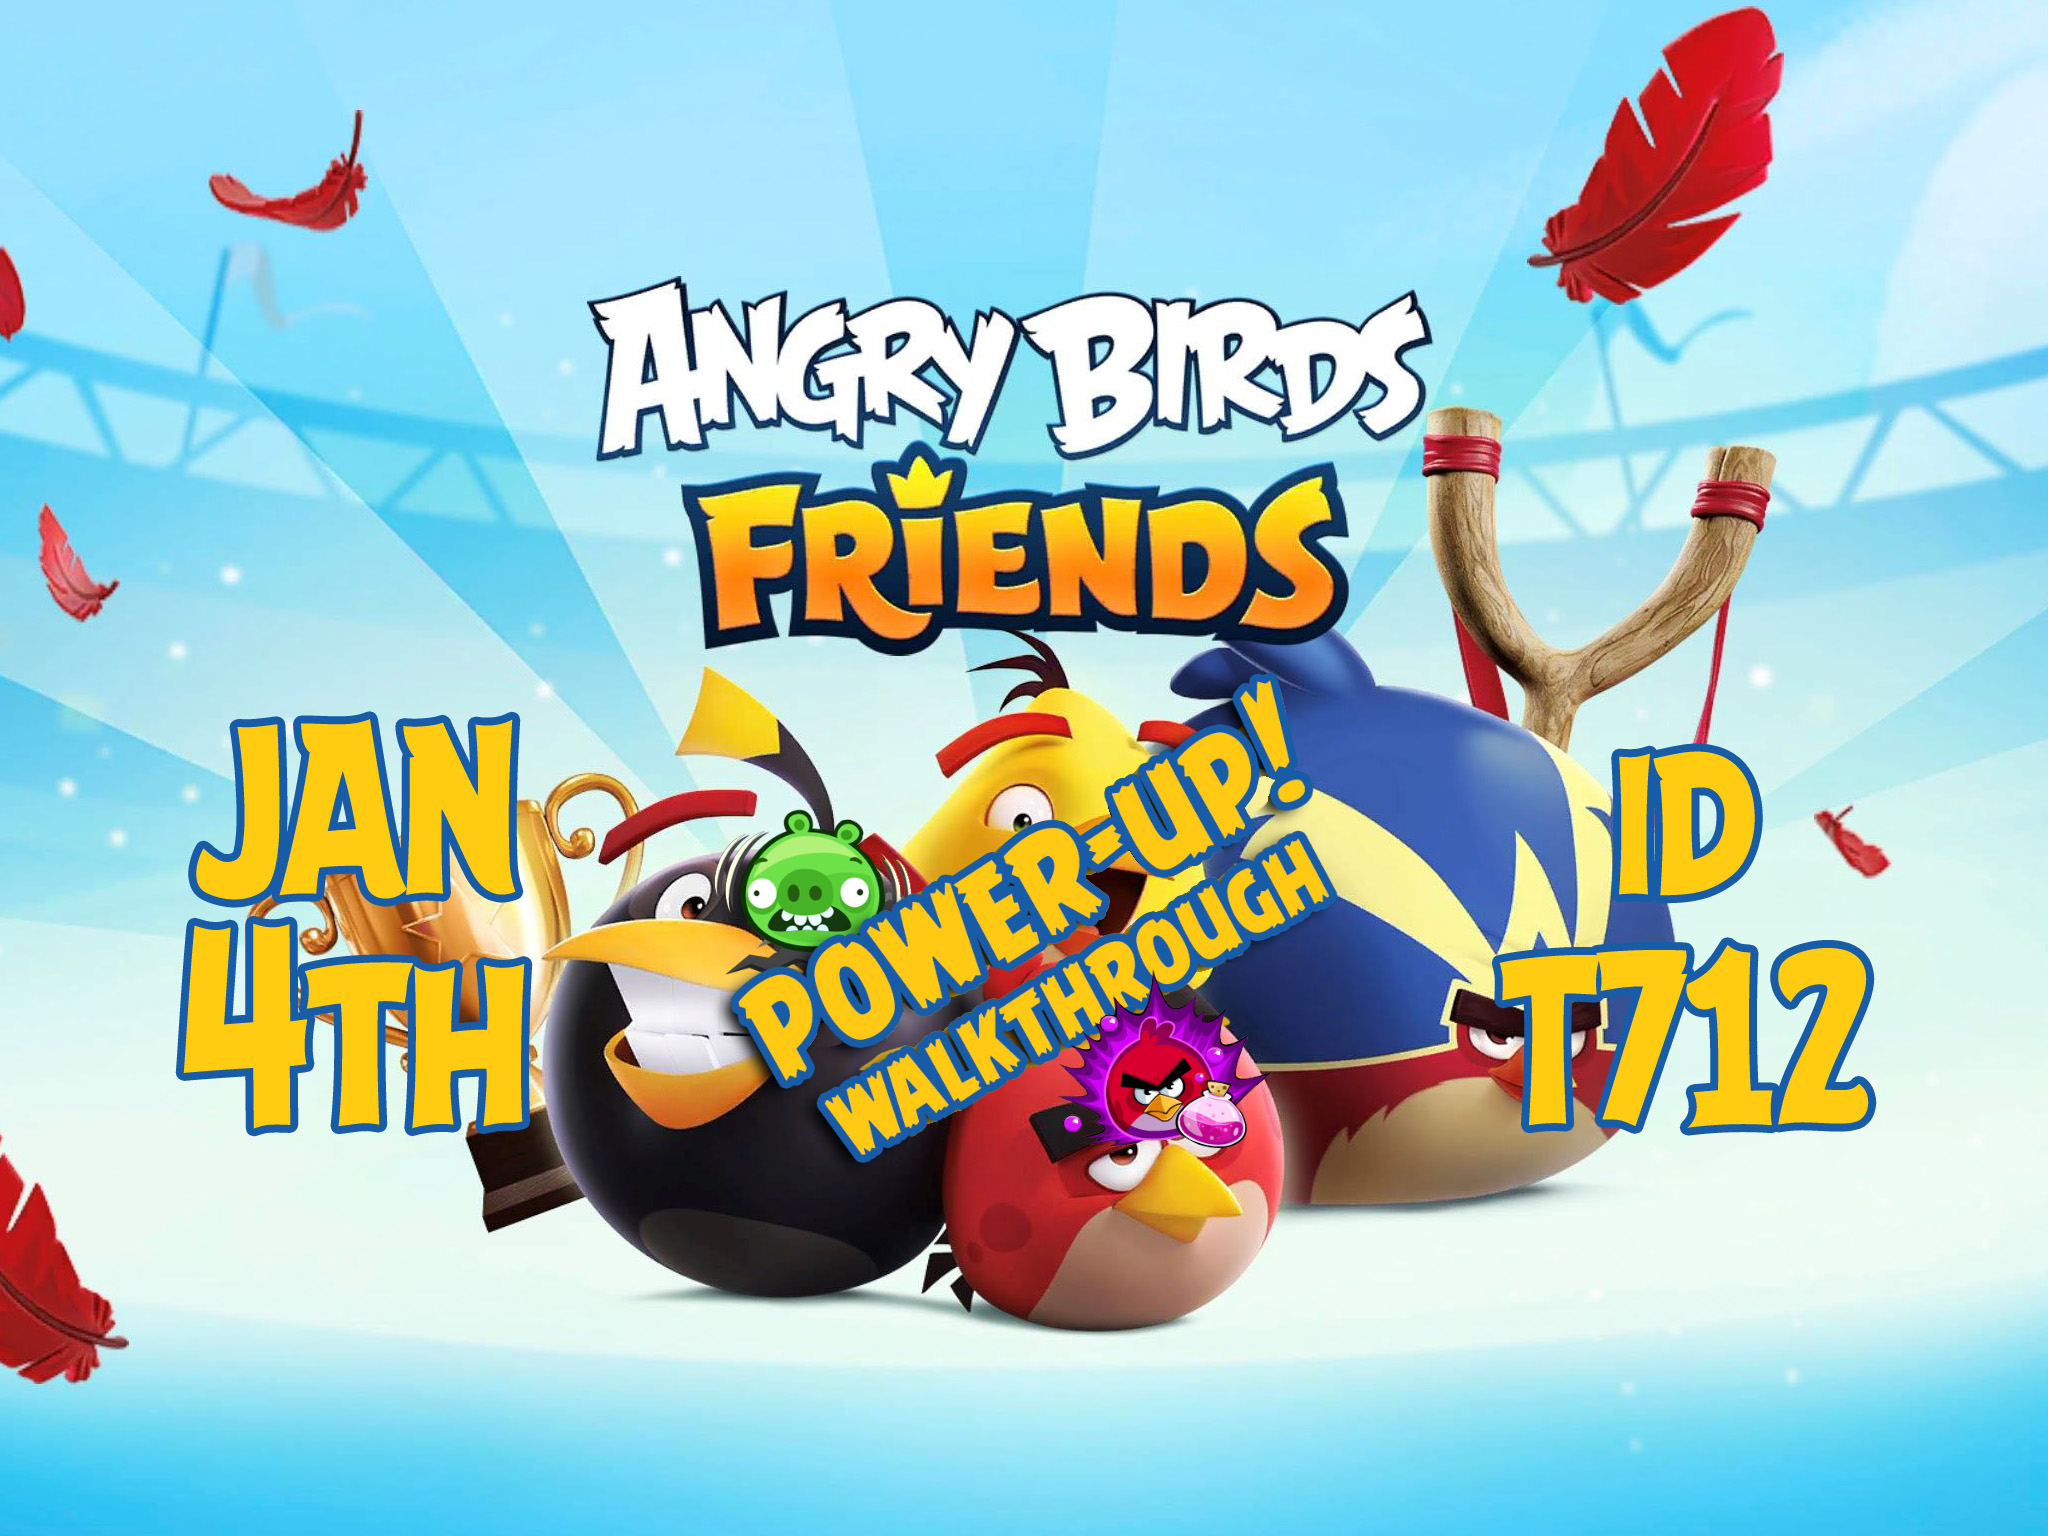 Angry-Birds-Friends-Tournament-T712-Feature-Image-PU